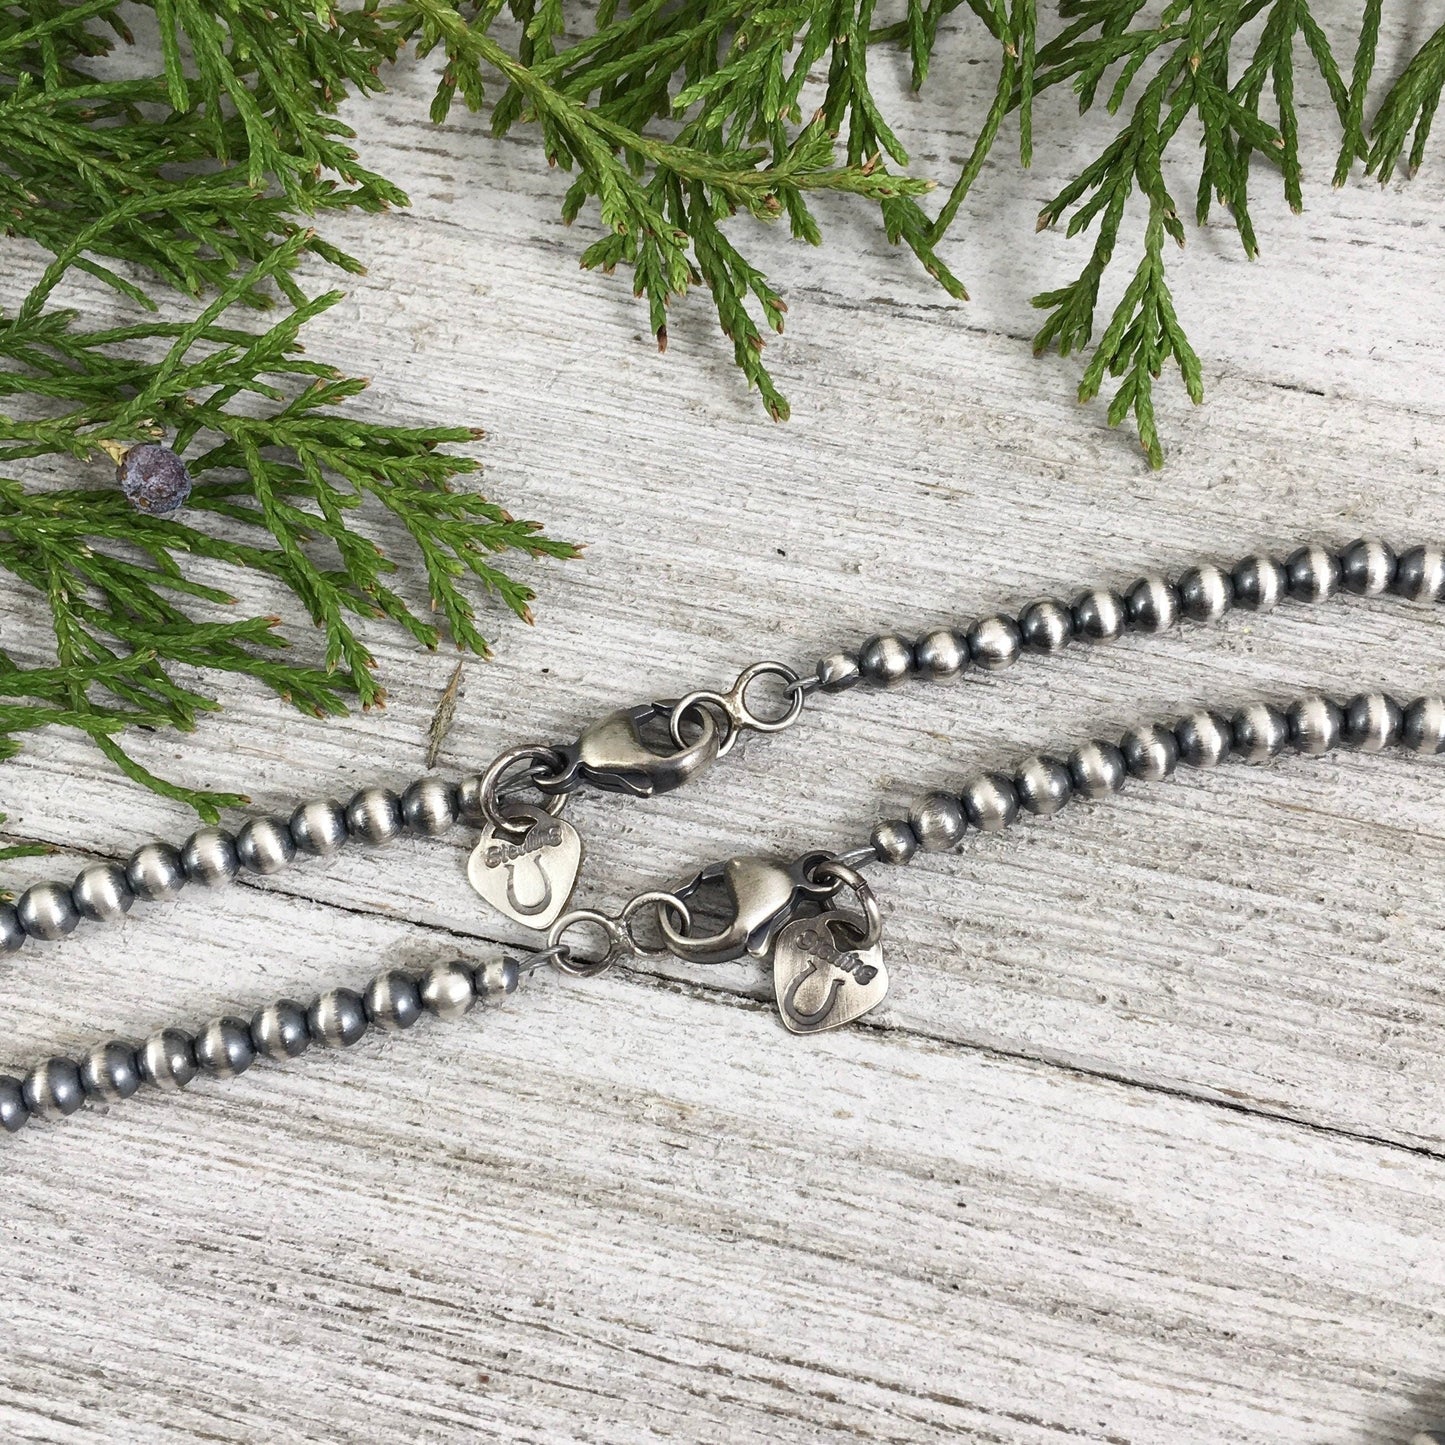 4mm Sterling Silver Bead, Necklace, Oxidized Sterling Silver, Classic Western Choker, small beads, Southwest Pearls